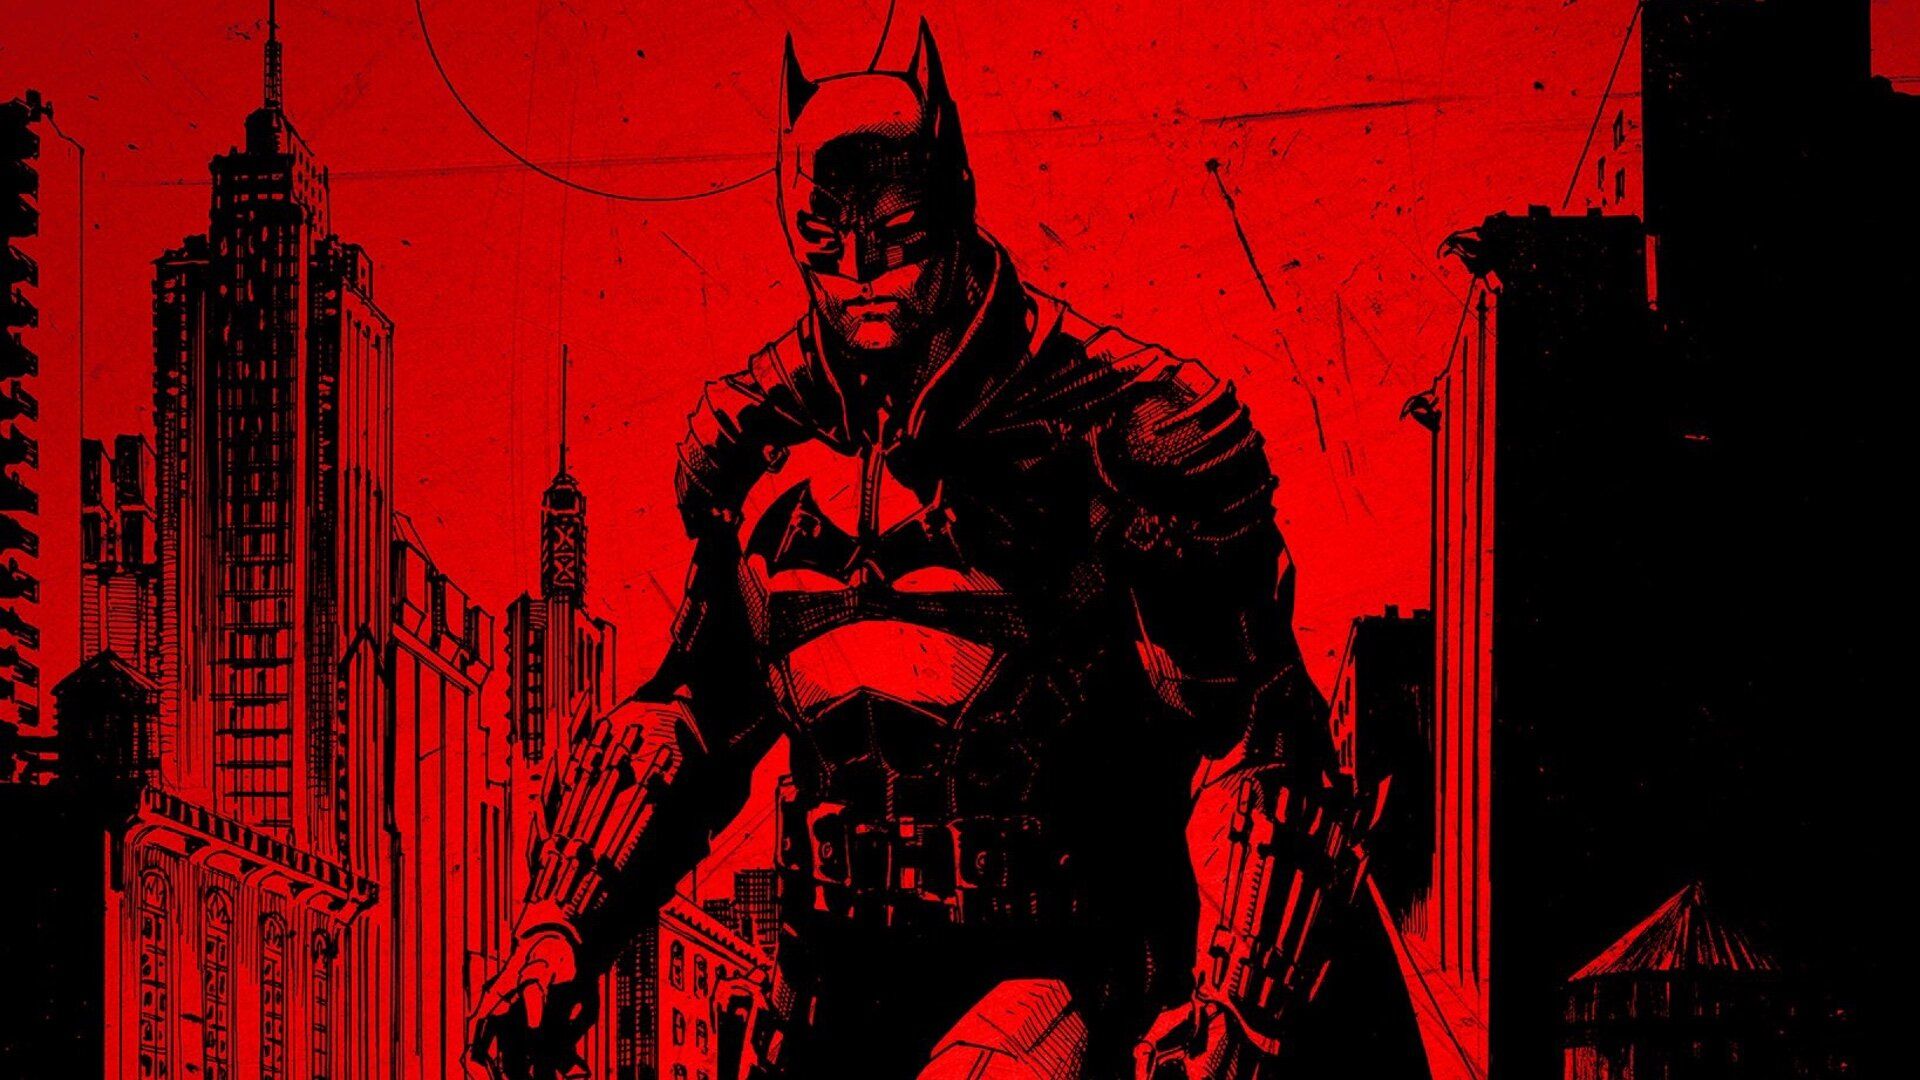 Explained: Is Matt Reeves' The Batman Based on a DC Comics Storyline?